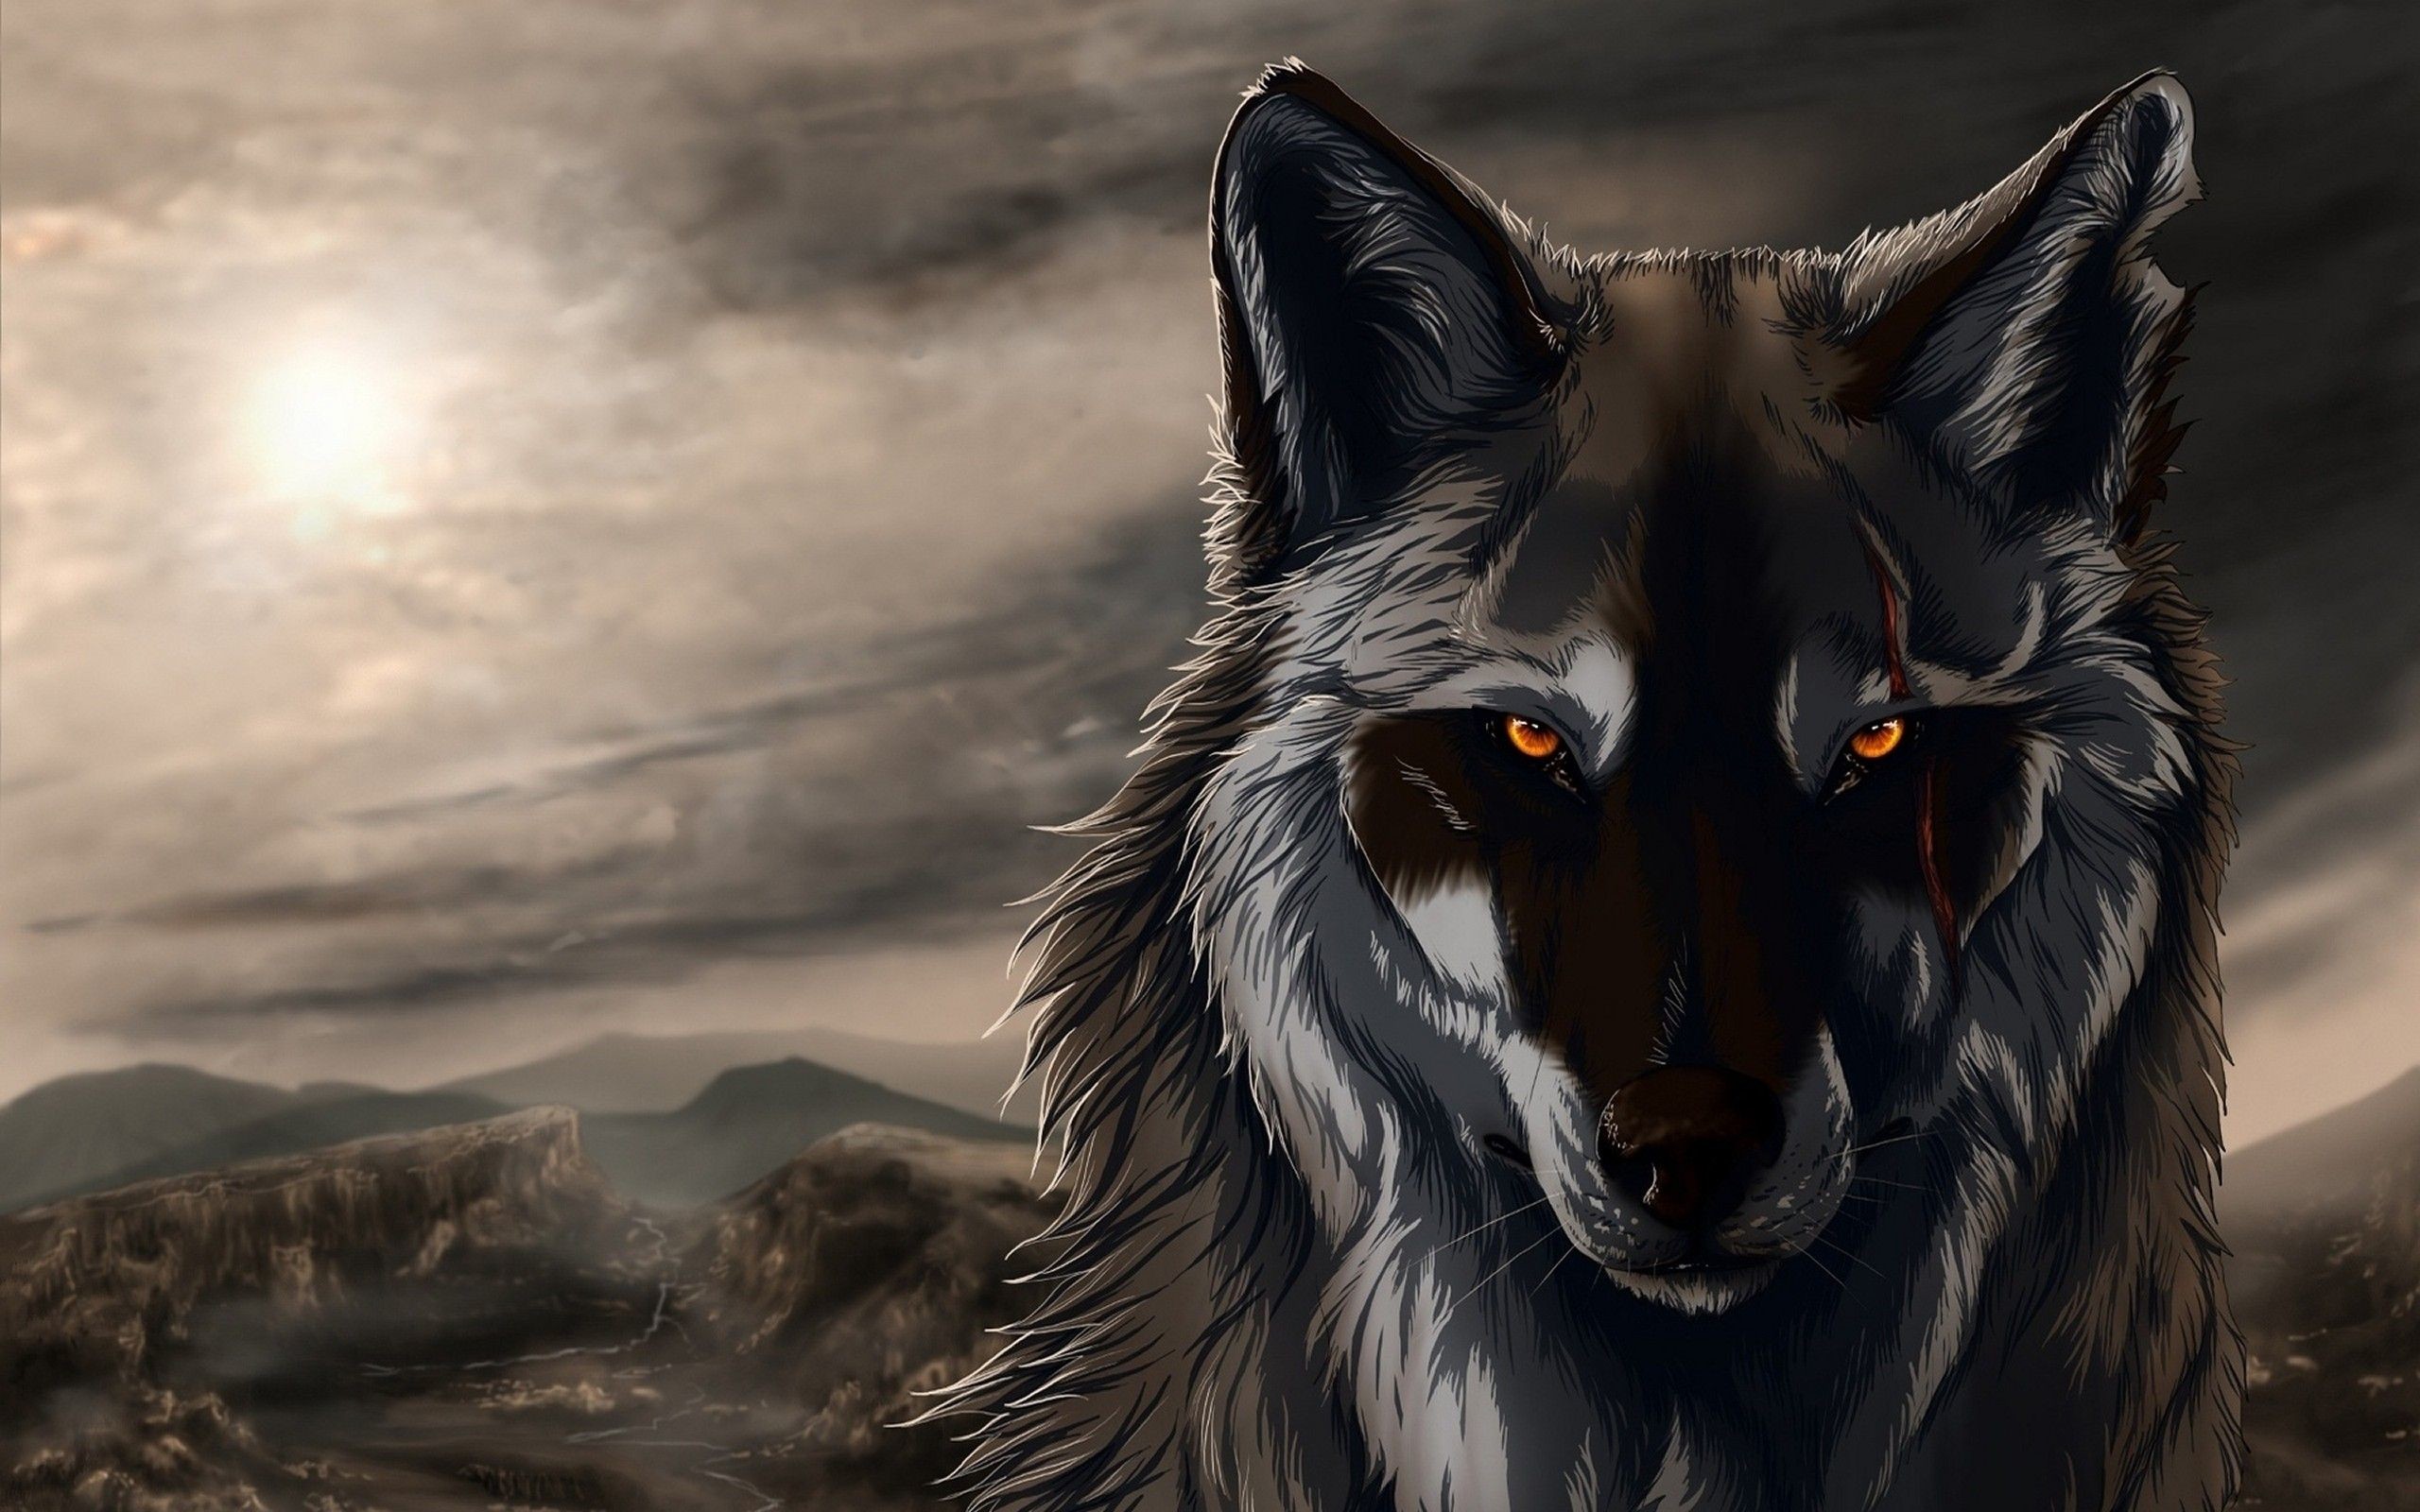 2560x1600 Anime Wolf Wallpapers - Wallpaper Cave | Anime Wolves | Pinterest | Wolf  wallpaper, Anime wolf and Wallpaper